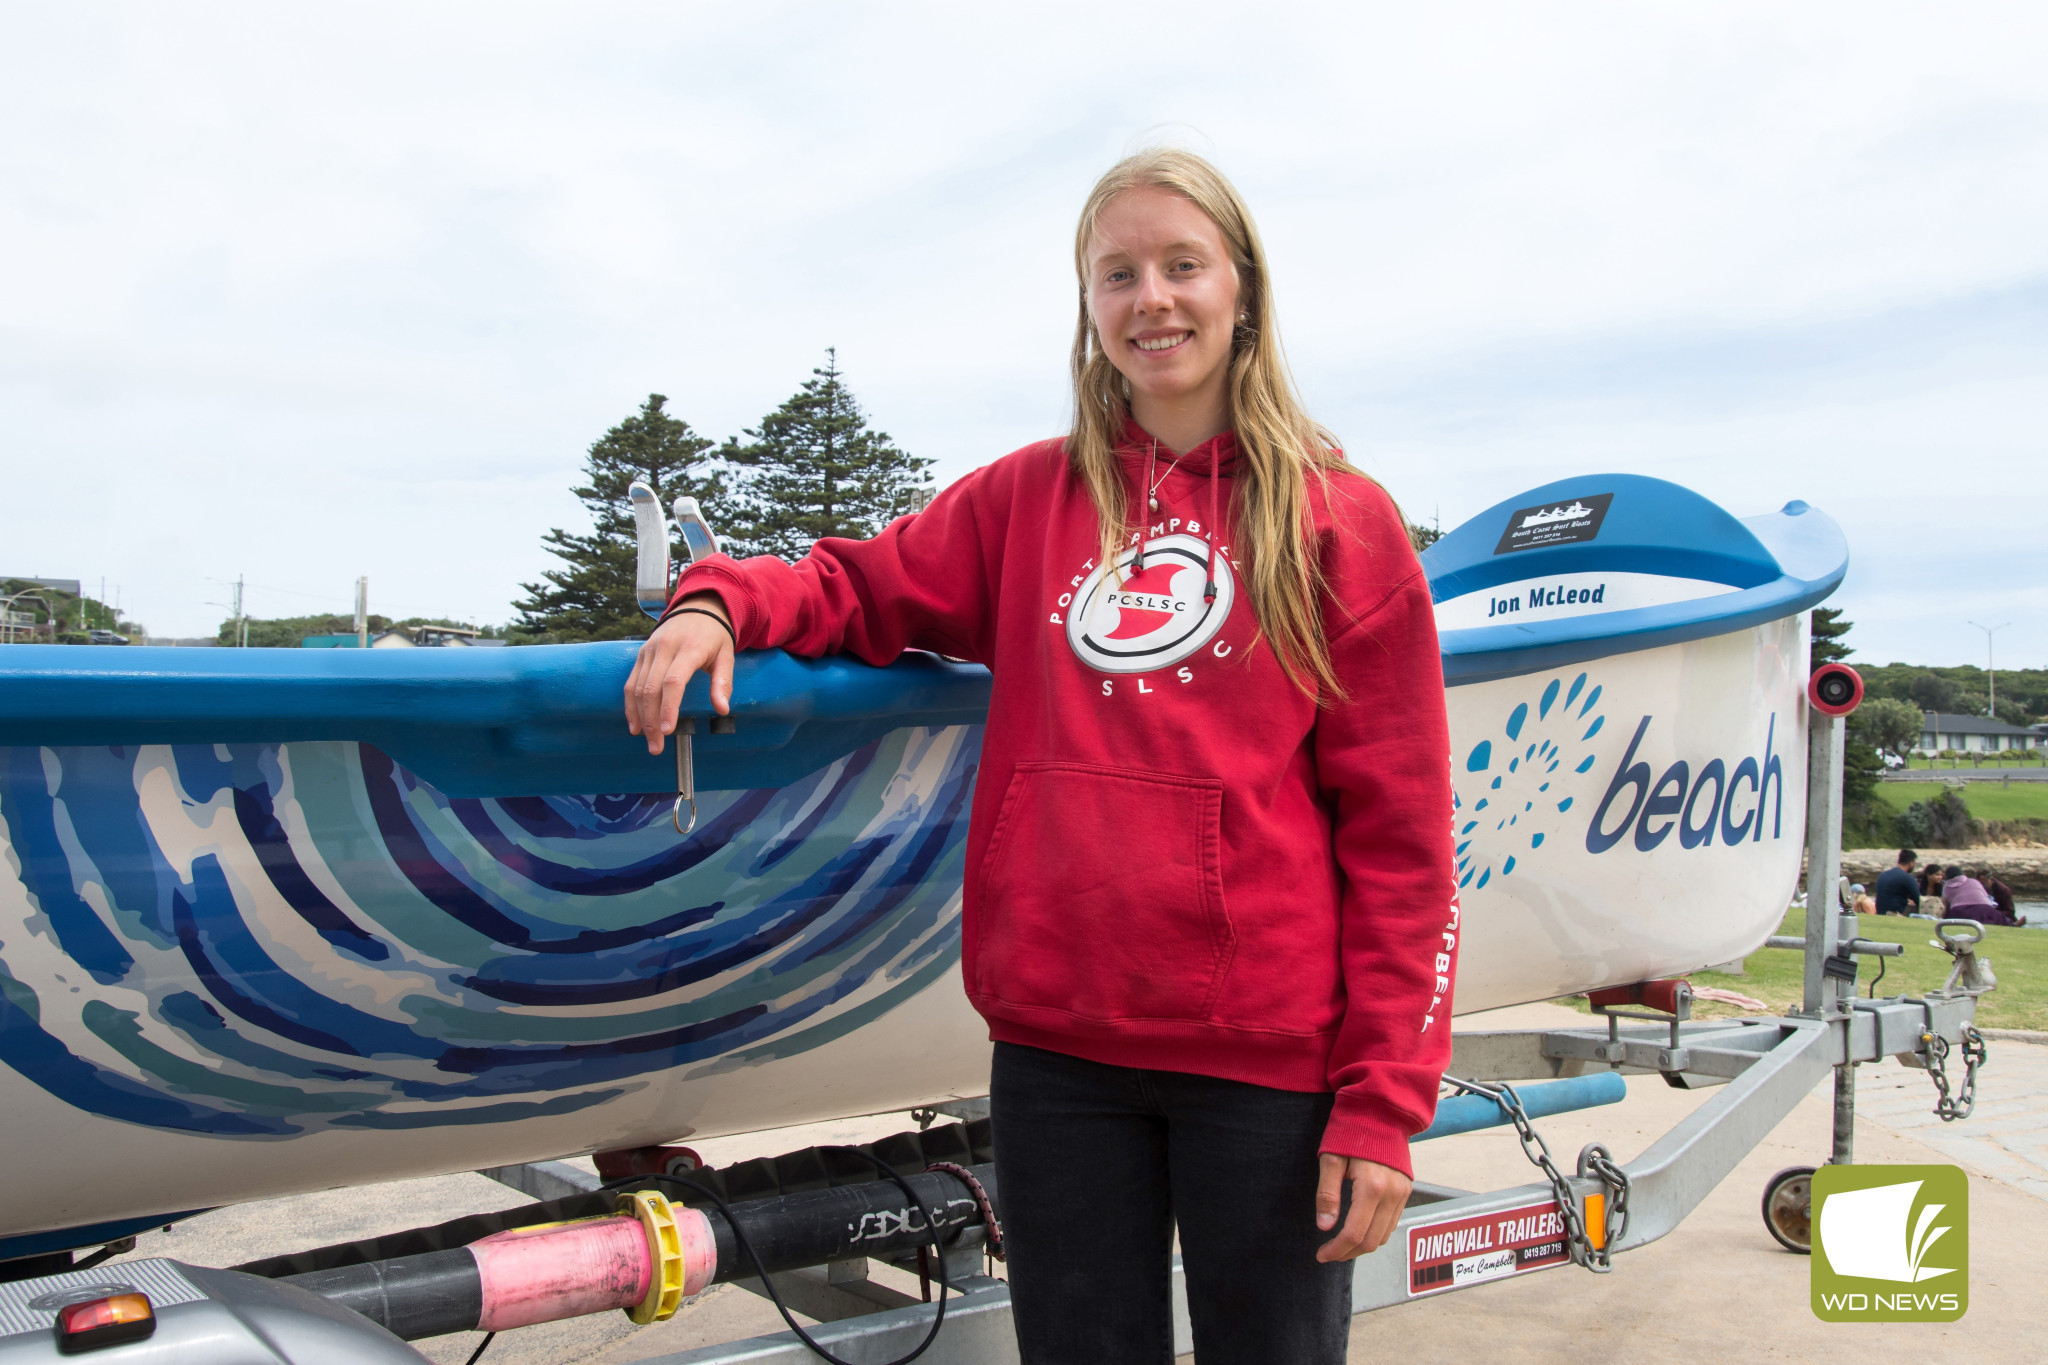 Alysa Hibburt painted an ocean-inspired piece, which now adorns a Port Campbell surf lifesaving boat named in honour of her late mentor.